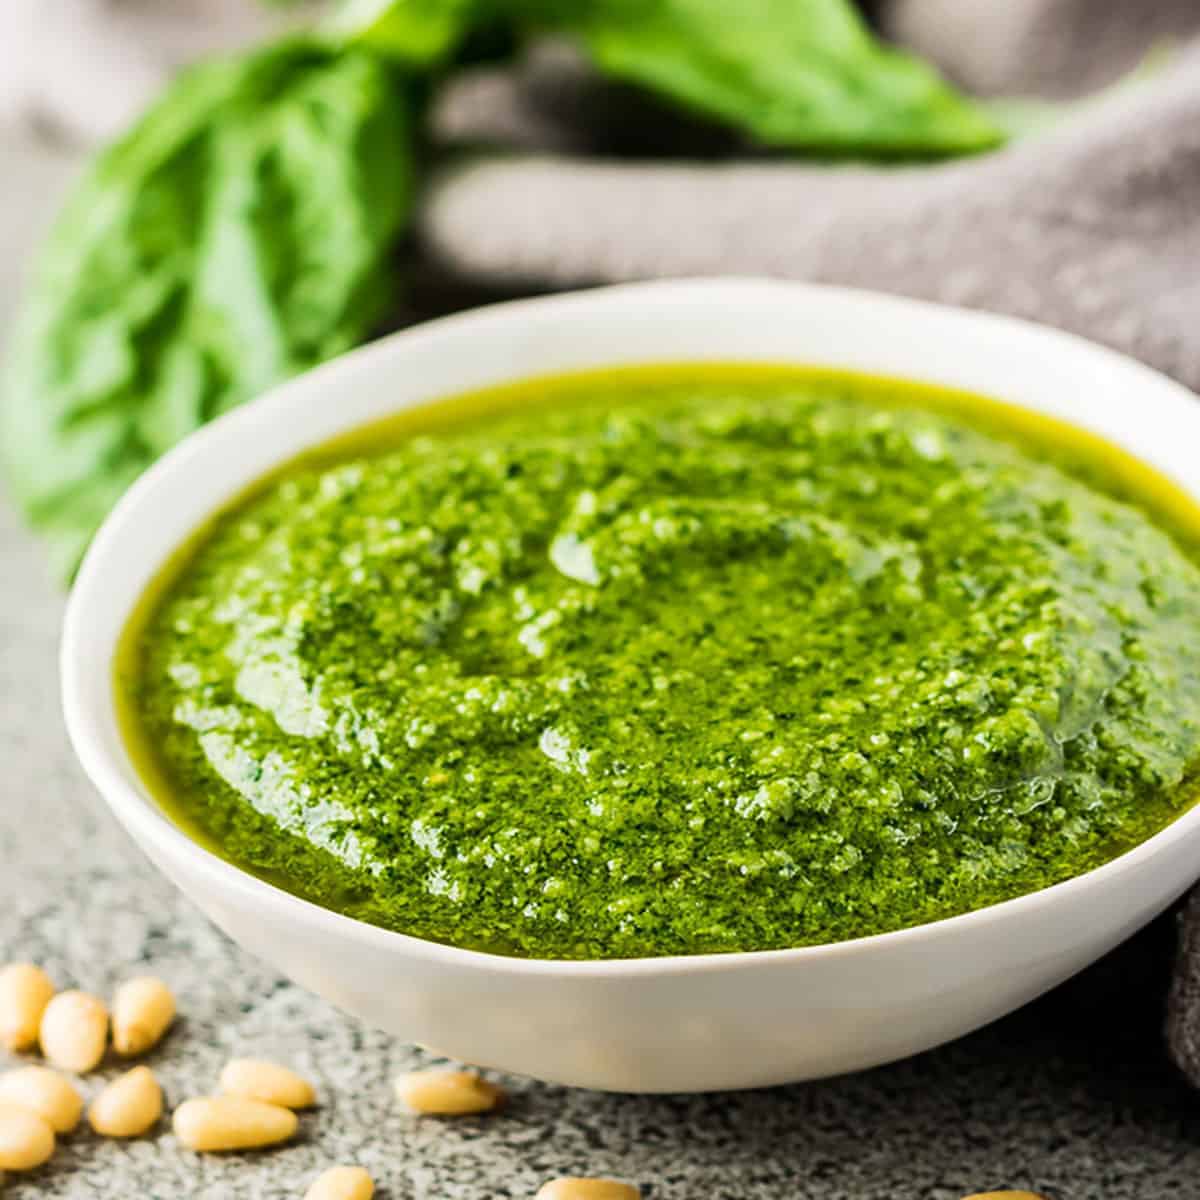 Creamy pesto sauce in a small bowl next to pine nuts.